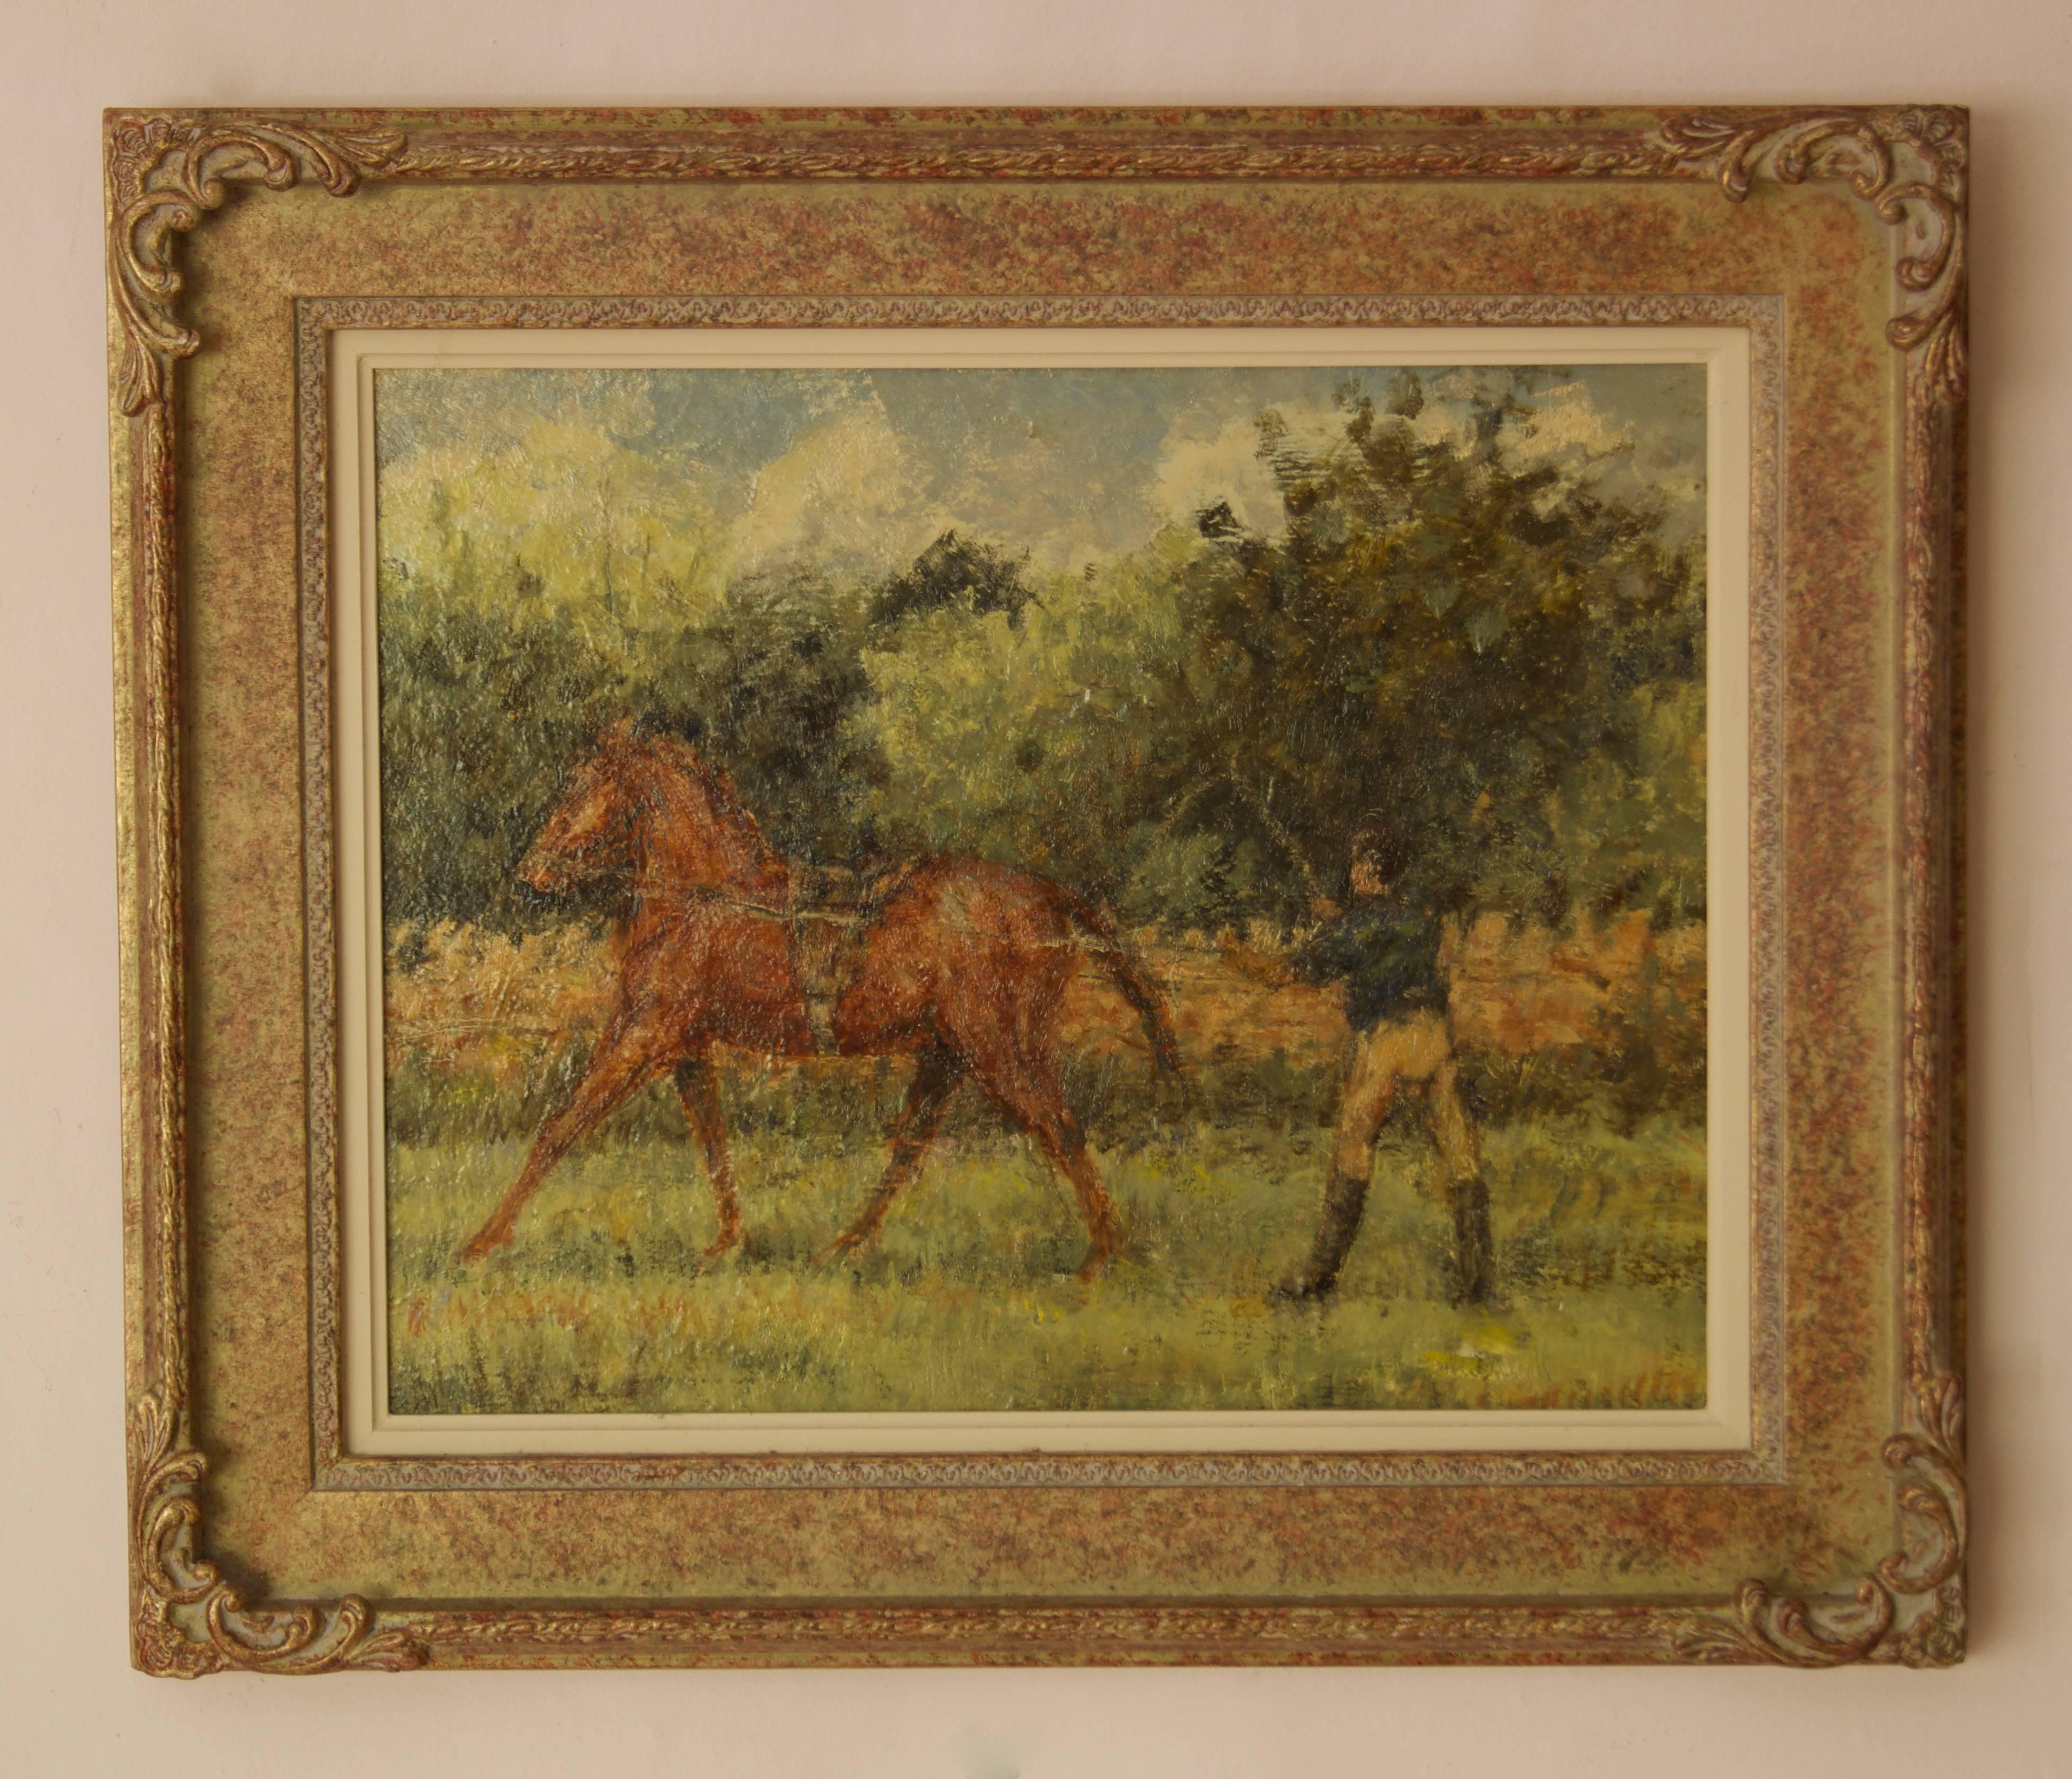 Kay Hinwood (1920 - 2006)

This piece titled Training Day was created using oil on board and is in a handmade swept composite frame.

It features: Horse, horses, training, people, horse rider, horse riding, landscape, countryside, fields,